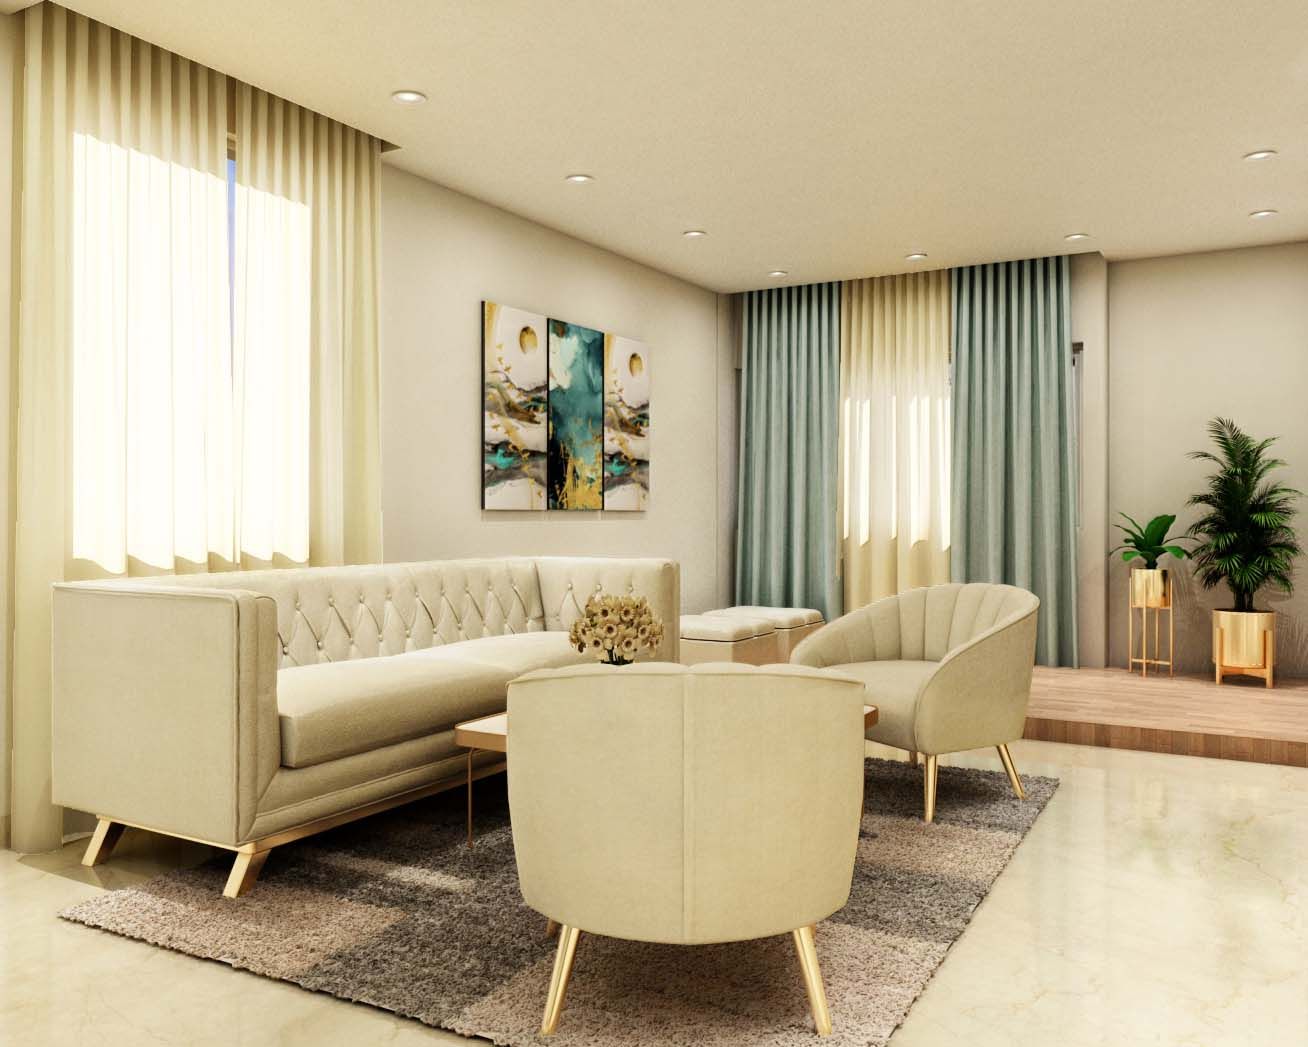 Contemporary Living Room Design With Cream Textures